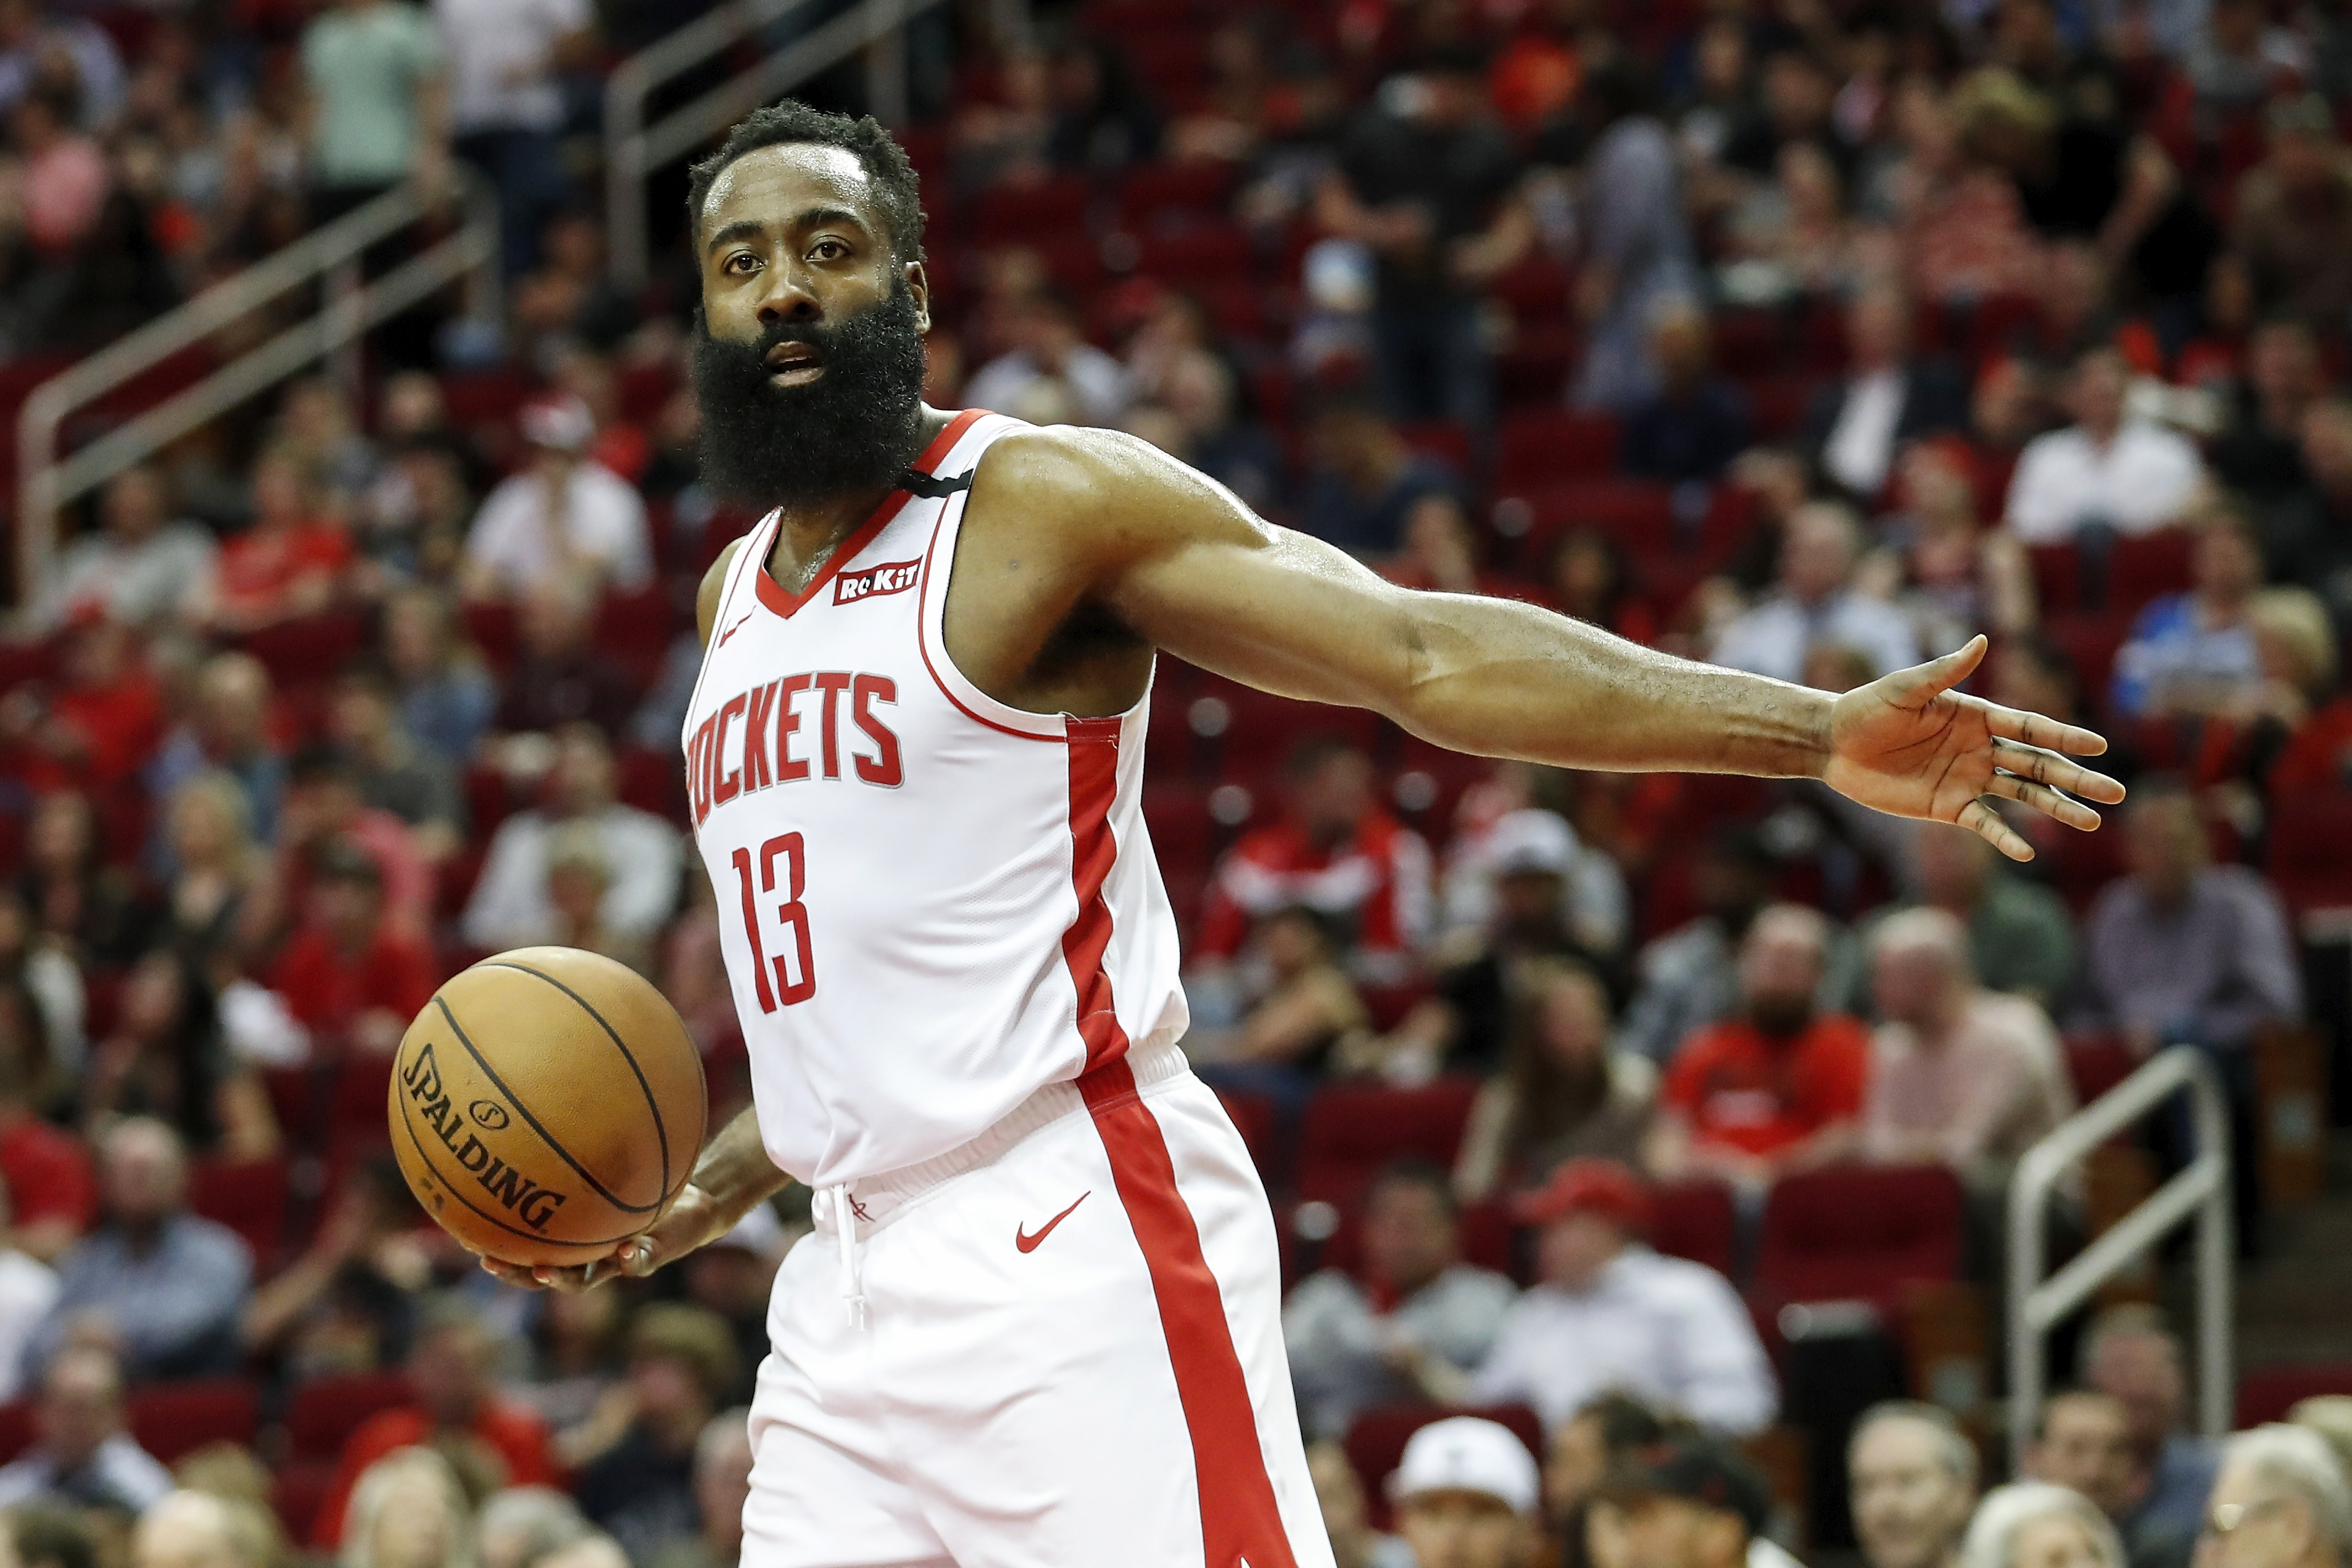 Past and present Rockets weigh in on James Harden's weight loss